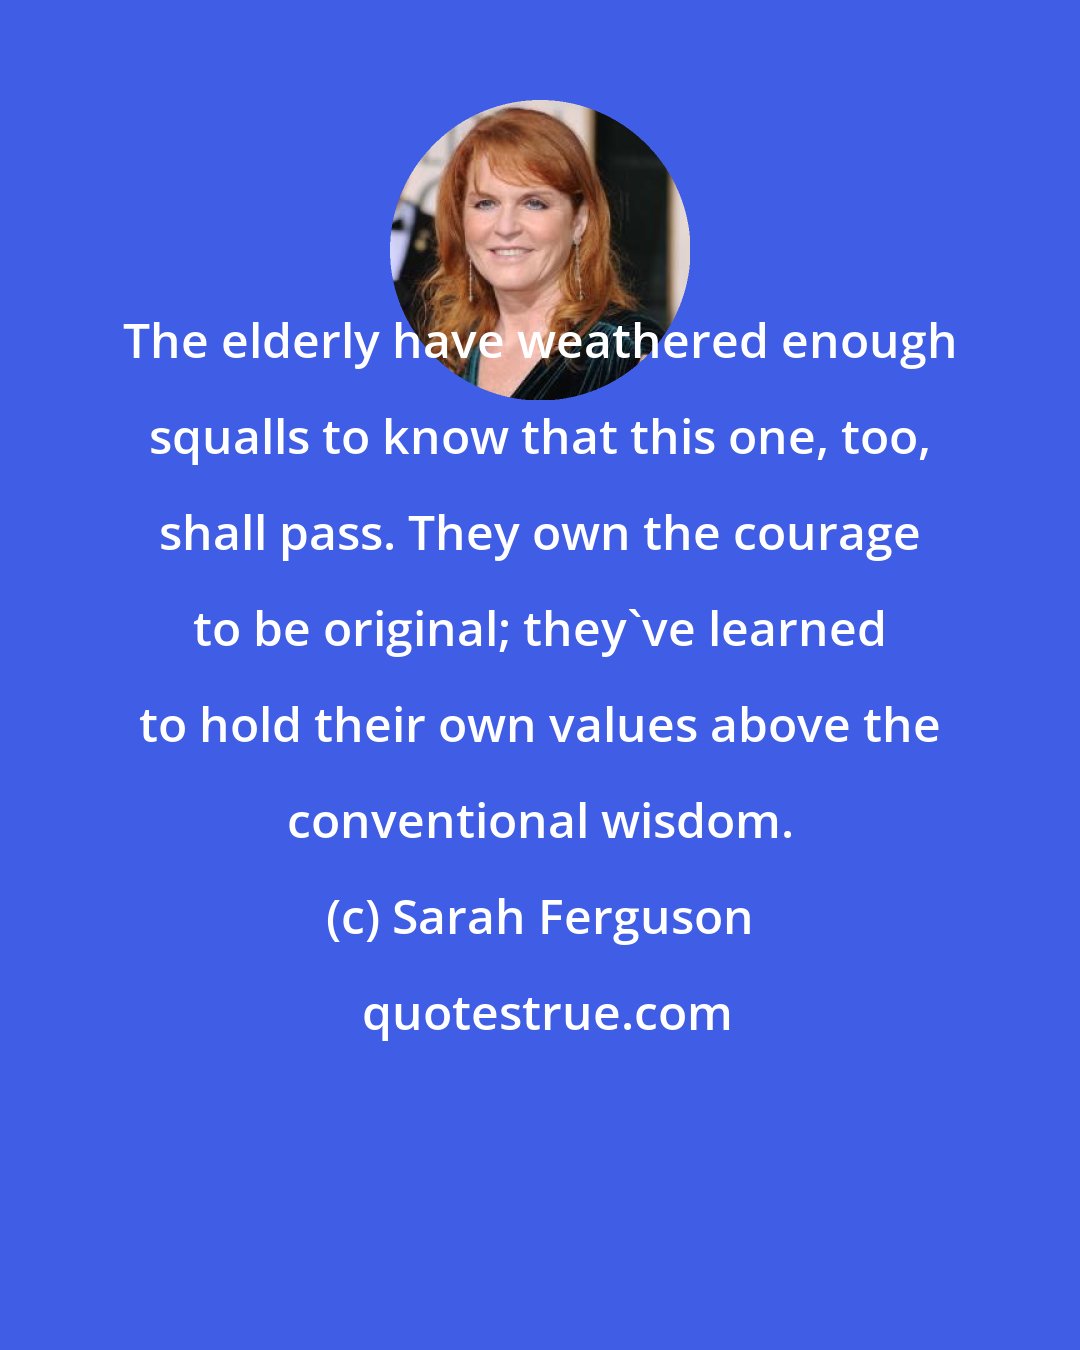 Sarah Ferguson: The elderly have weathered enough squalls to know that this one, too, shall pass. They own the courage to be original; they've learned to hold their own values above the conventional wisdom.